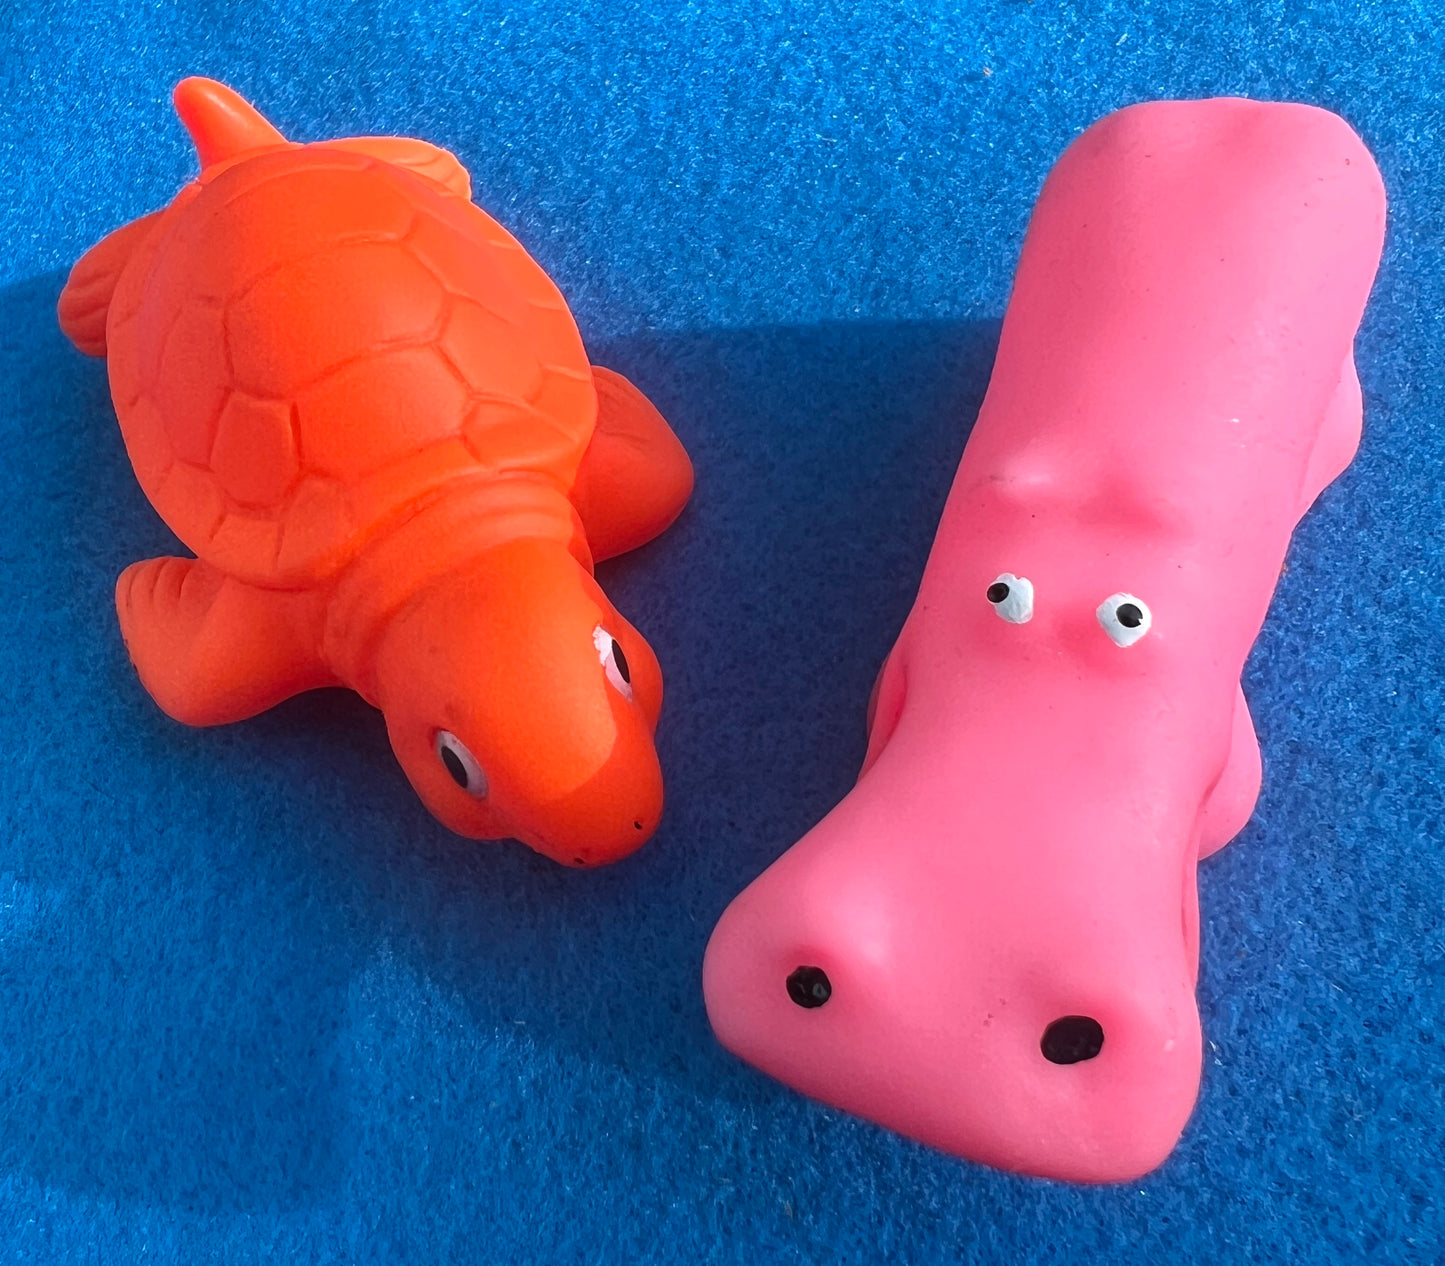 Best of Friends Rubber Squeezy Bath Toys